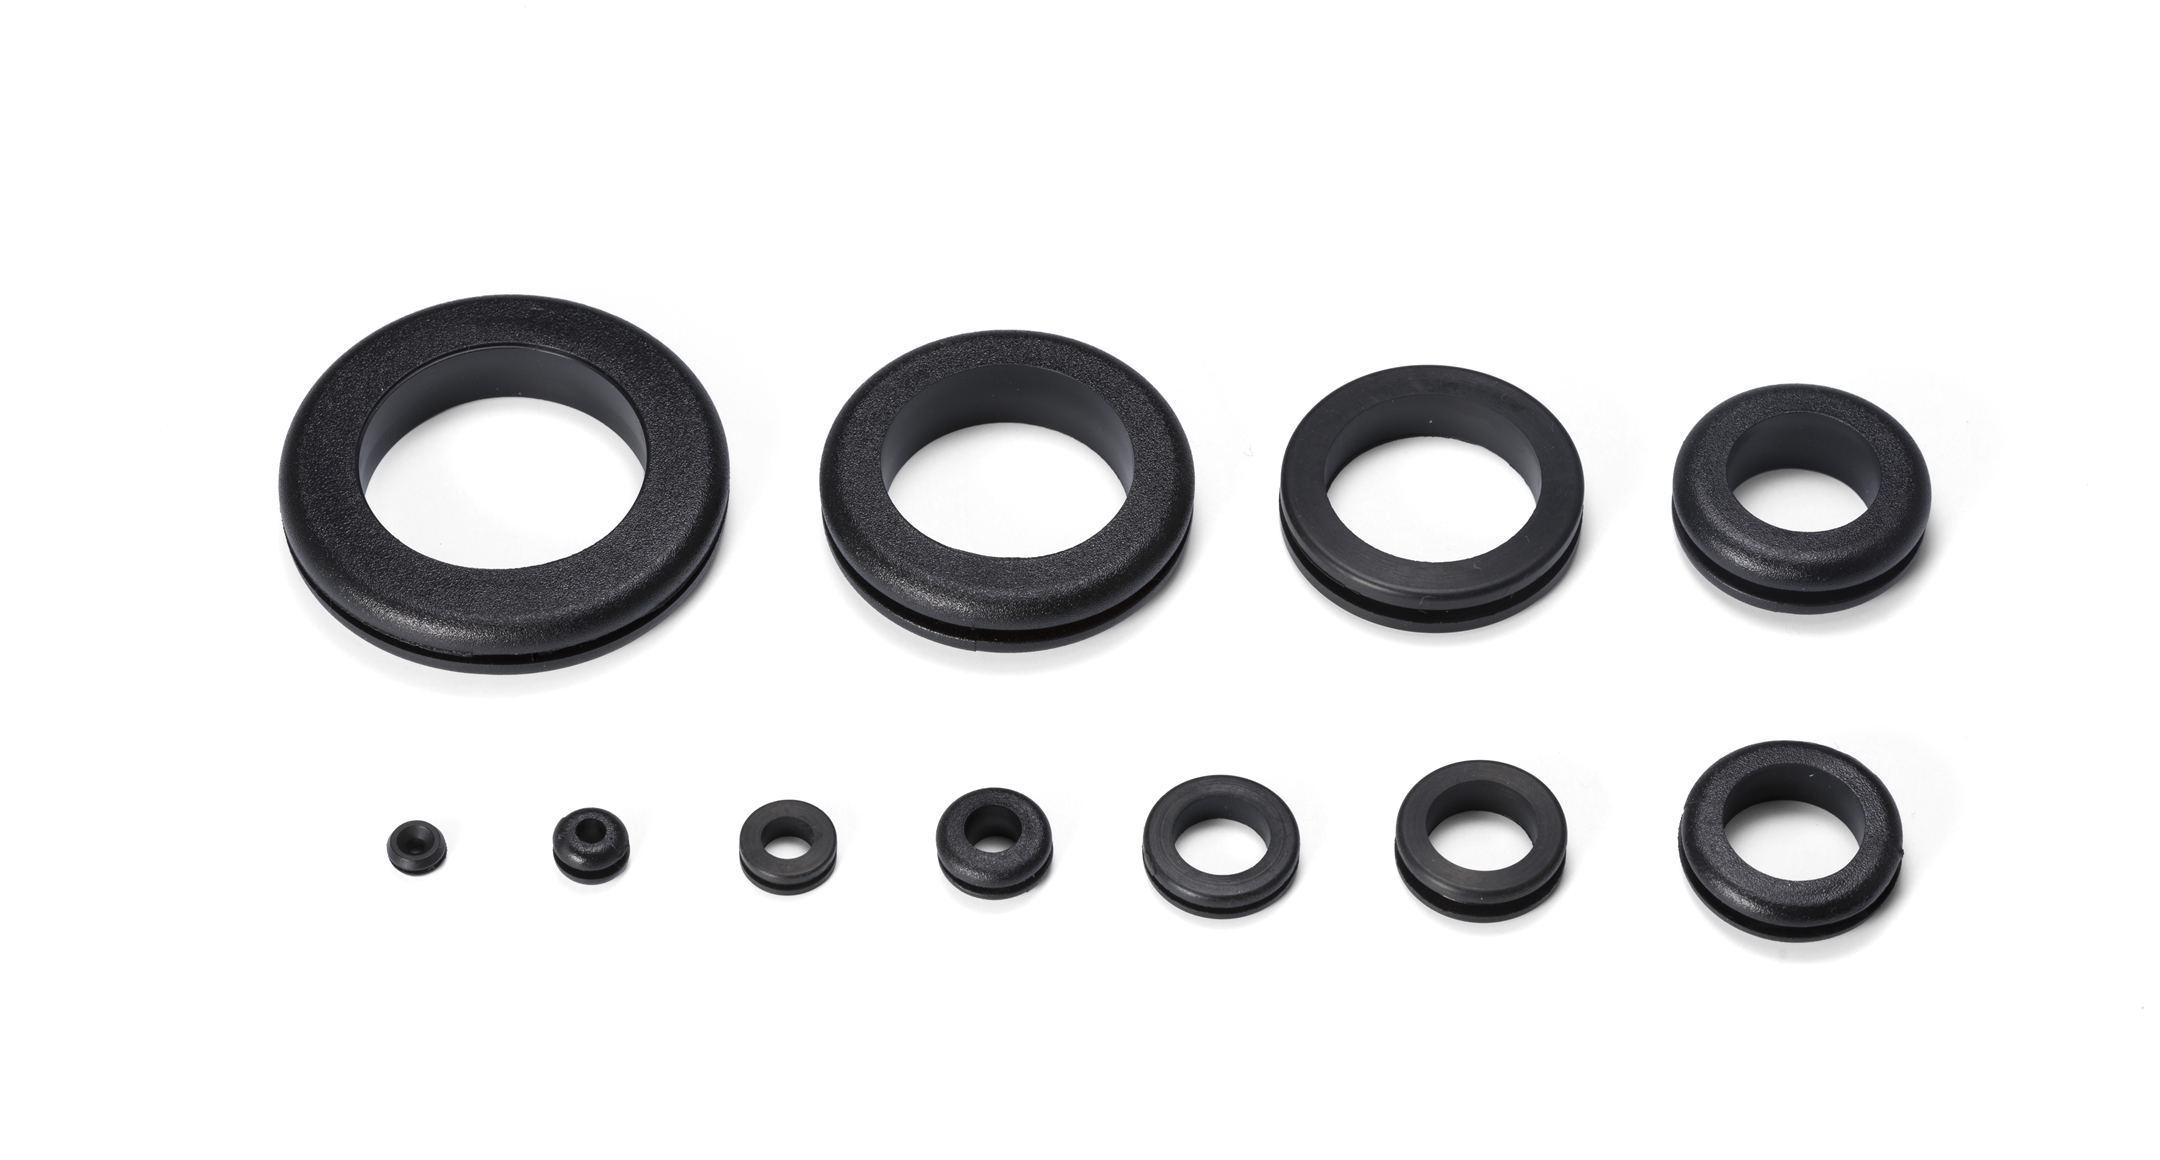 RUBBER GROMMET - NG series1